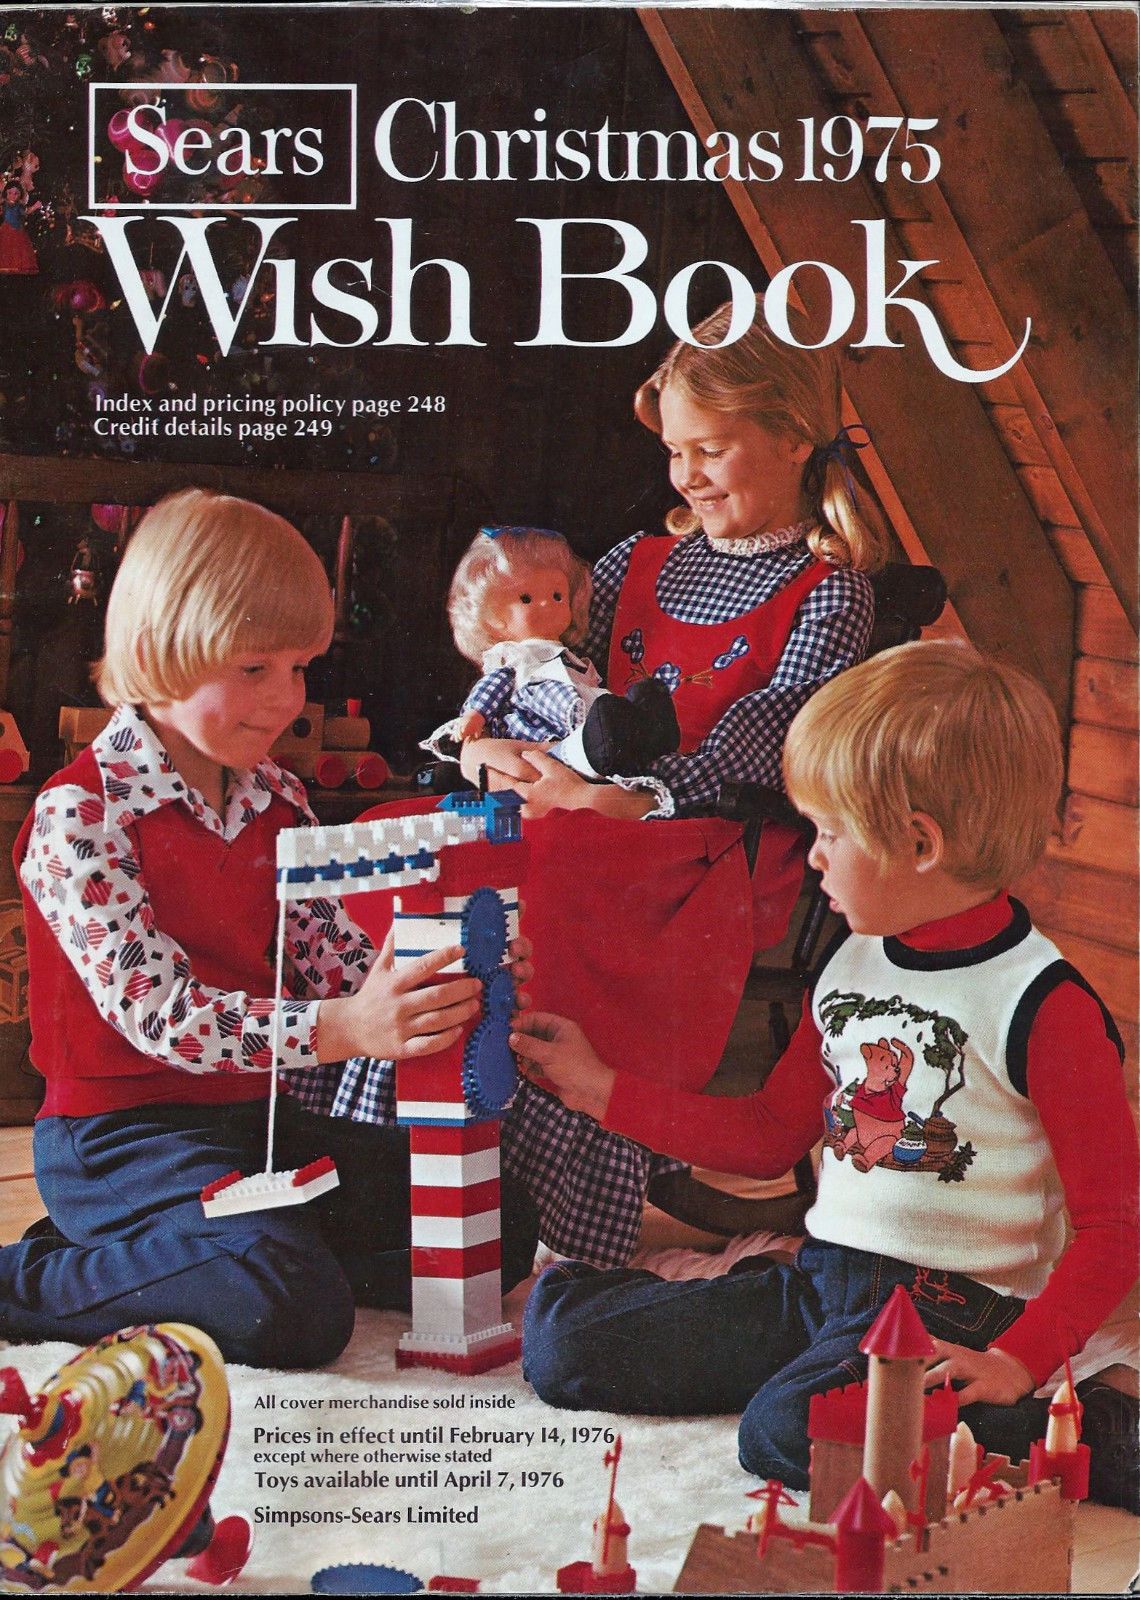 sears christmas catalog 1975 - Sears Christmas 1975 Wish Book Index and pricing policy page 248 Credit details page 249 All cover merchandise sold inside Prices in effect until , except where otherwise stated Toys available until SimpsonsSears Limited